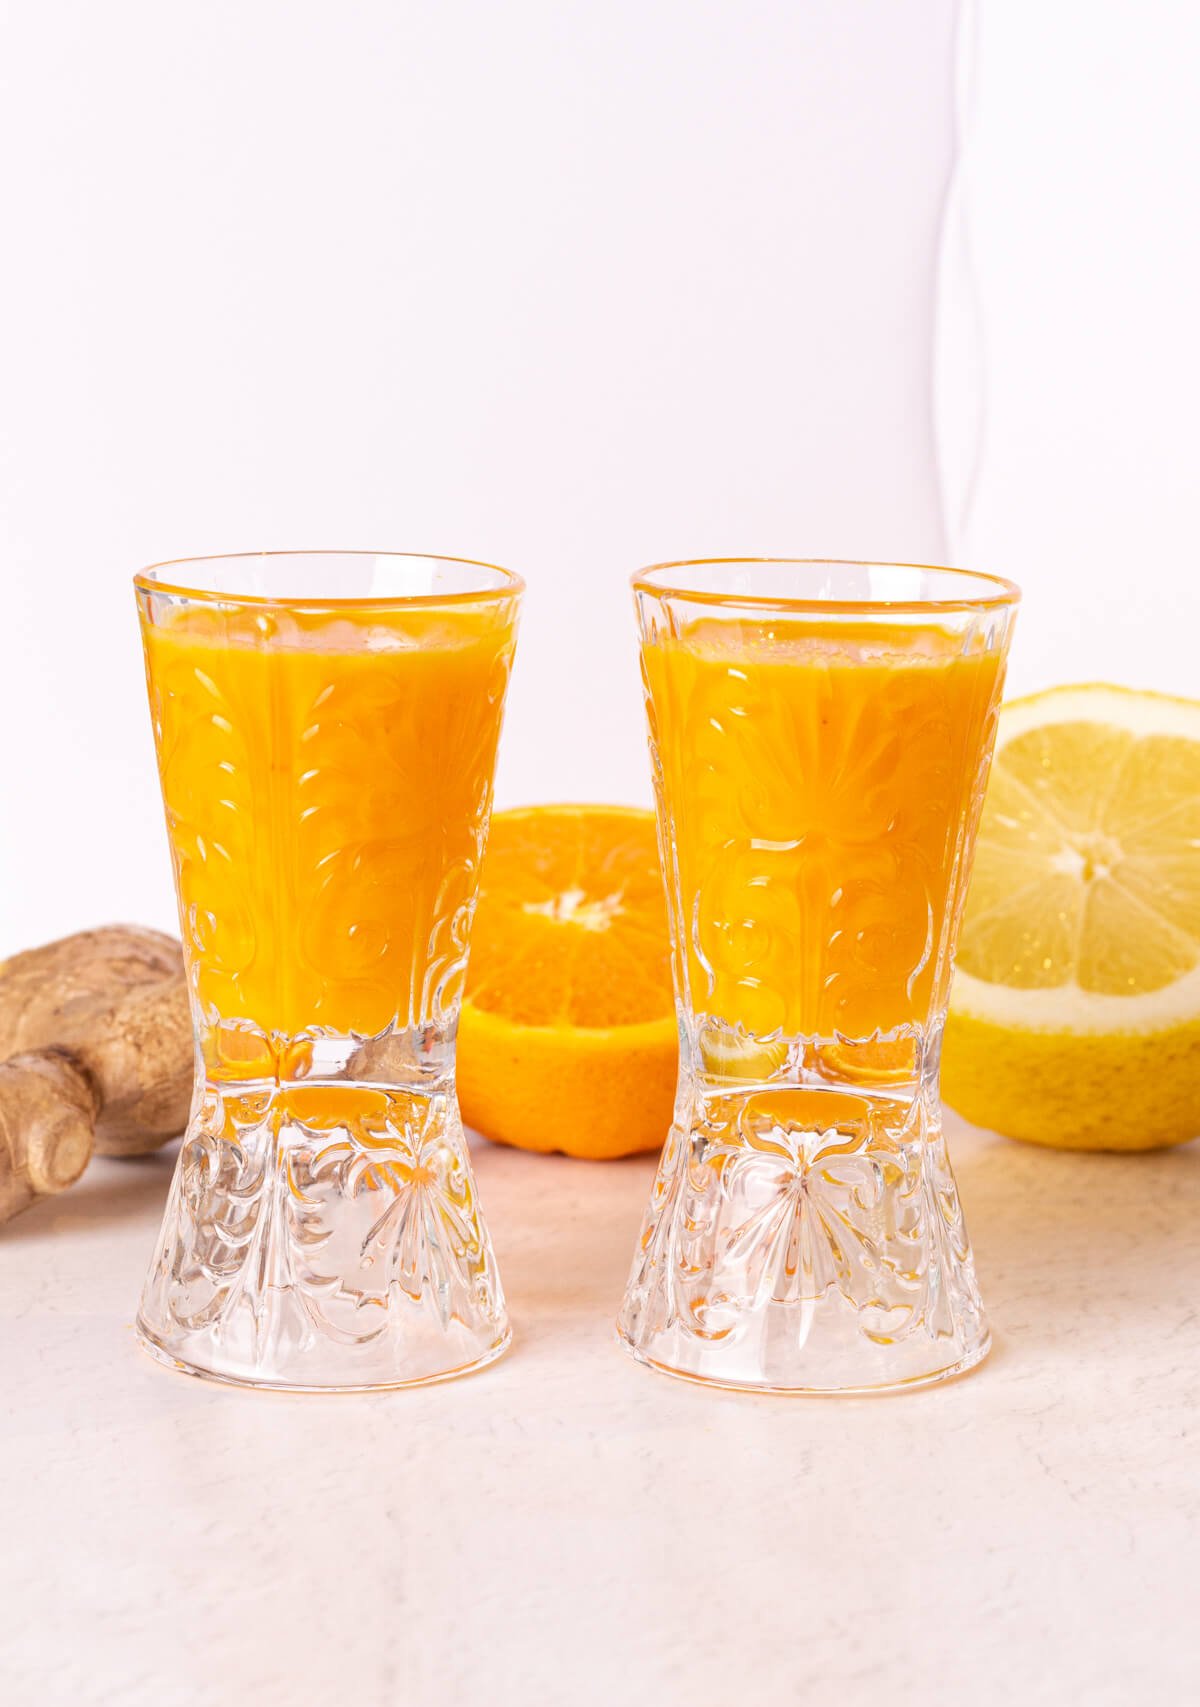 two wellness shots made with ginger turmeric and orange in glass shot glasses on a white background.